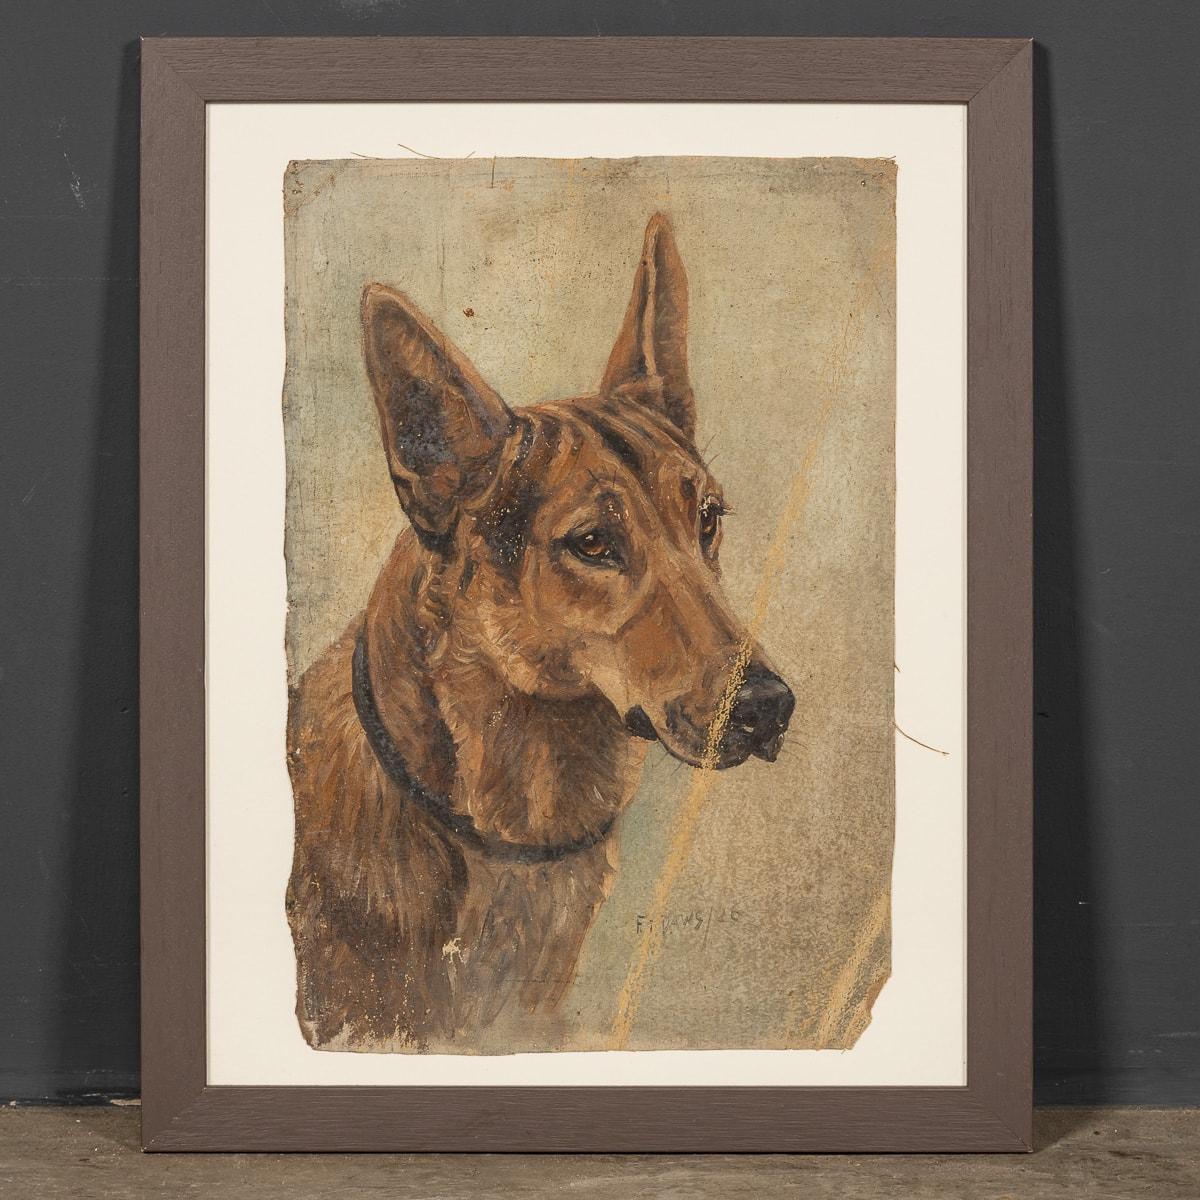 An antique 20th Century oil on canvas piece by Frederick Thomas Daws portraying a German Shepherd dating to 1926. Daws, famed for his depictions of champion dogs, commenced this artwork but left it unfinished. This piece is a work of art itself,